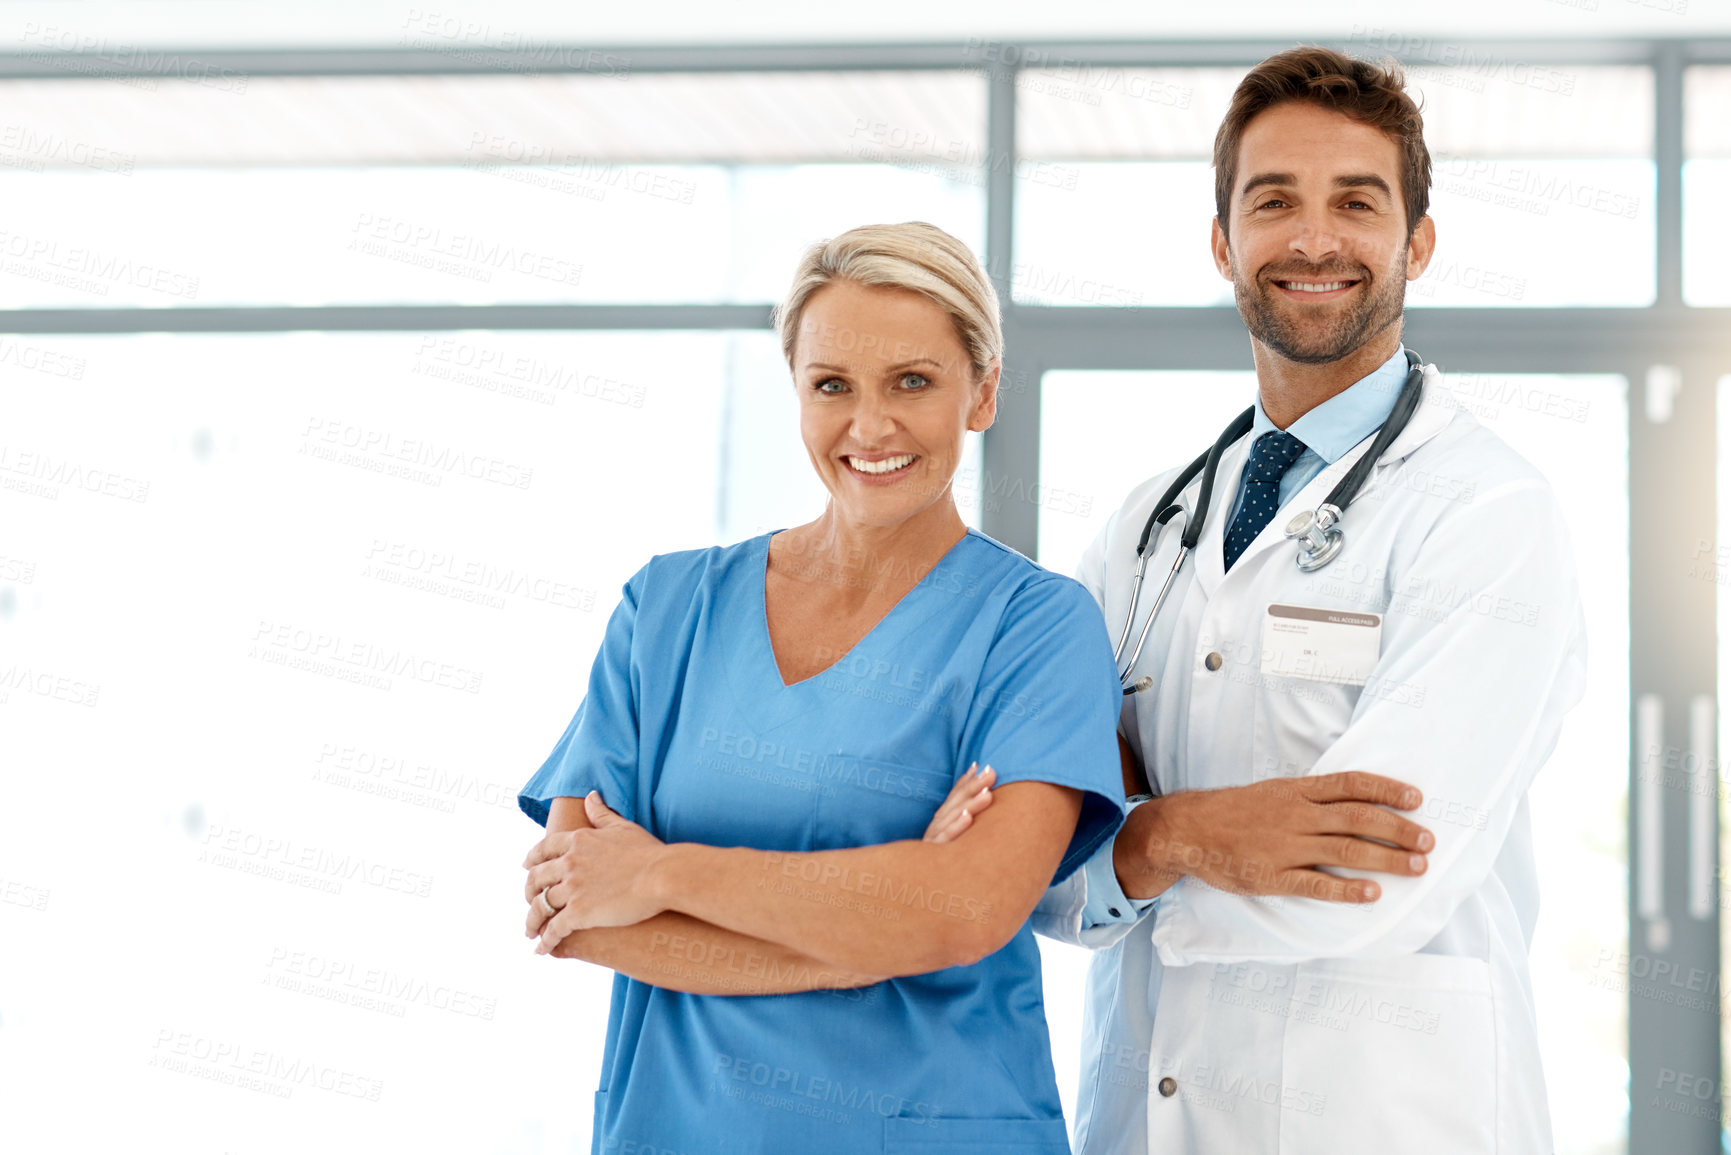 Buy stock photo Cropped portrait of two happy healthcare practitioners standing with their arms folded in the hospital